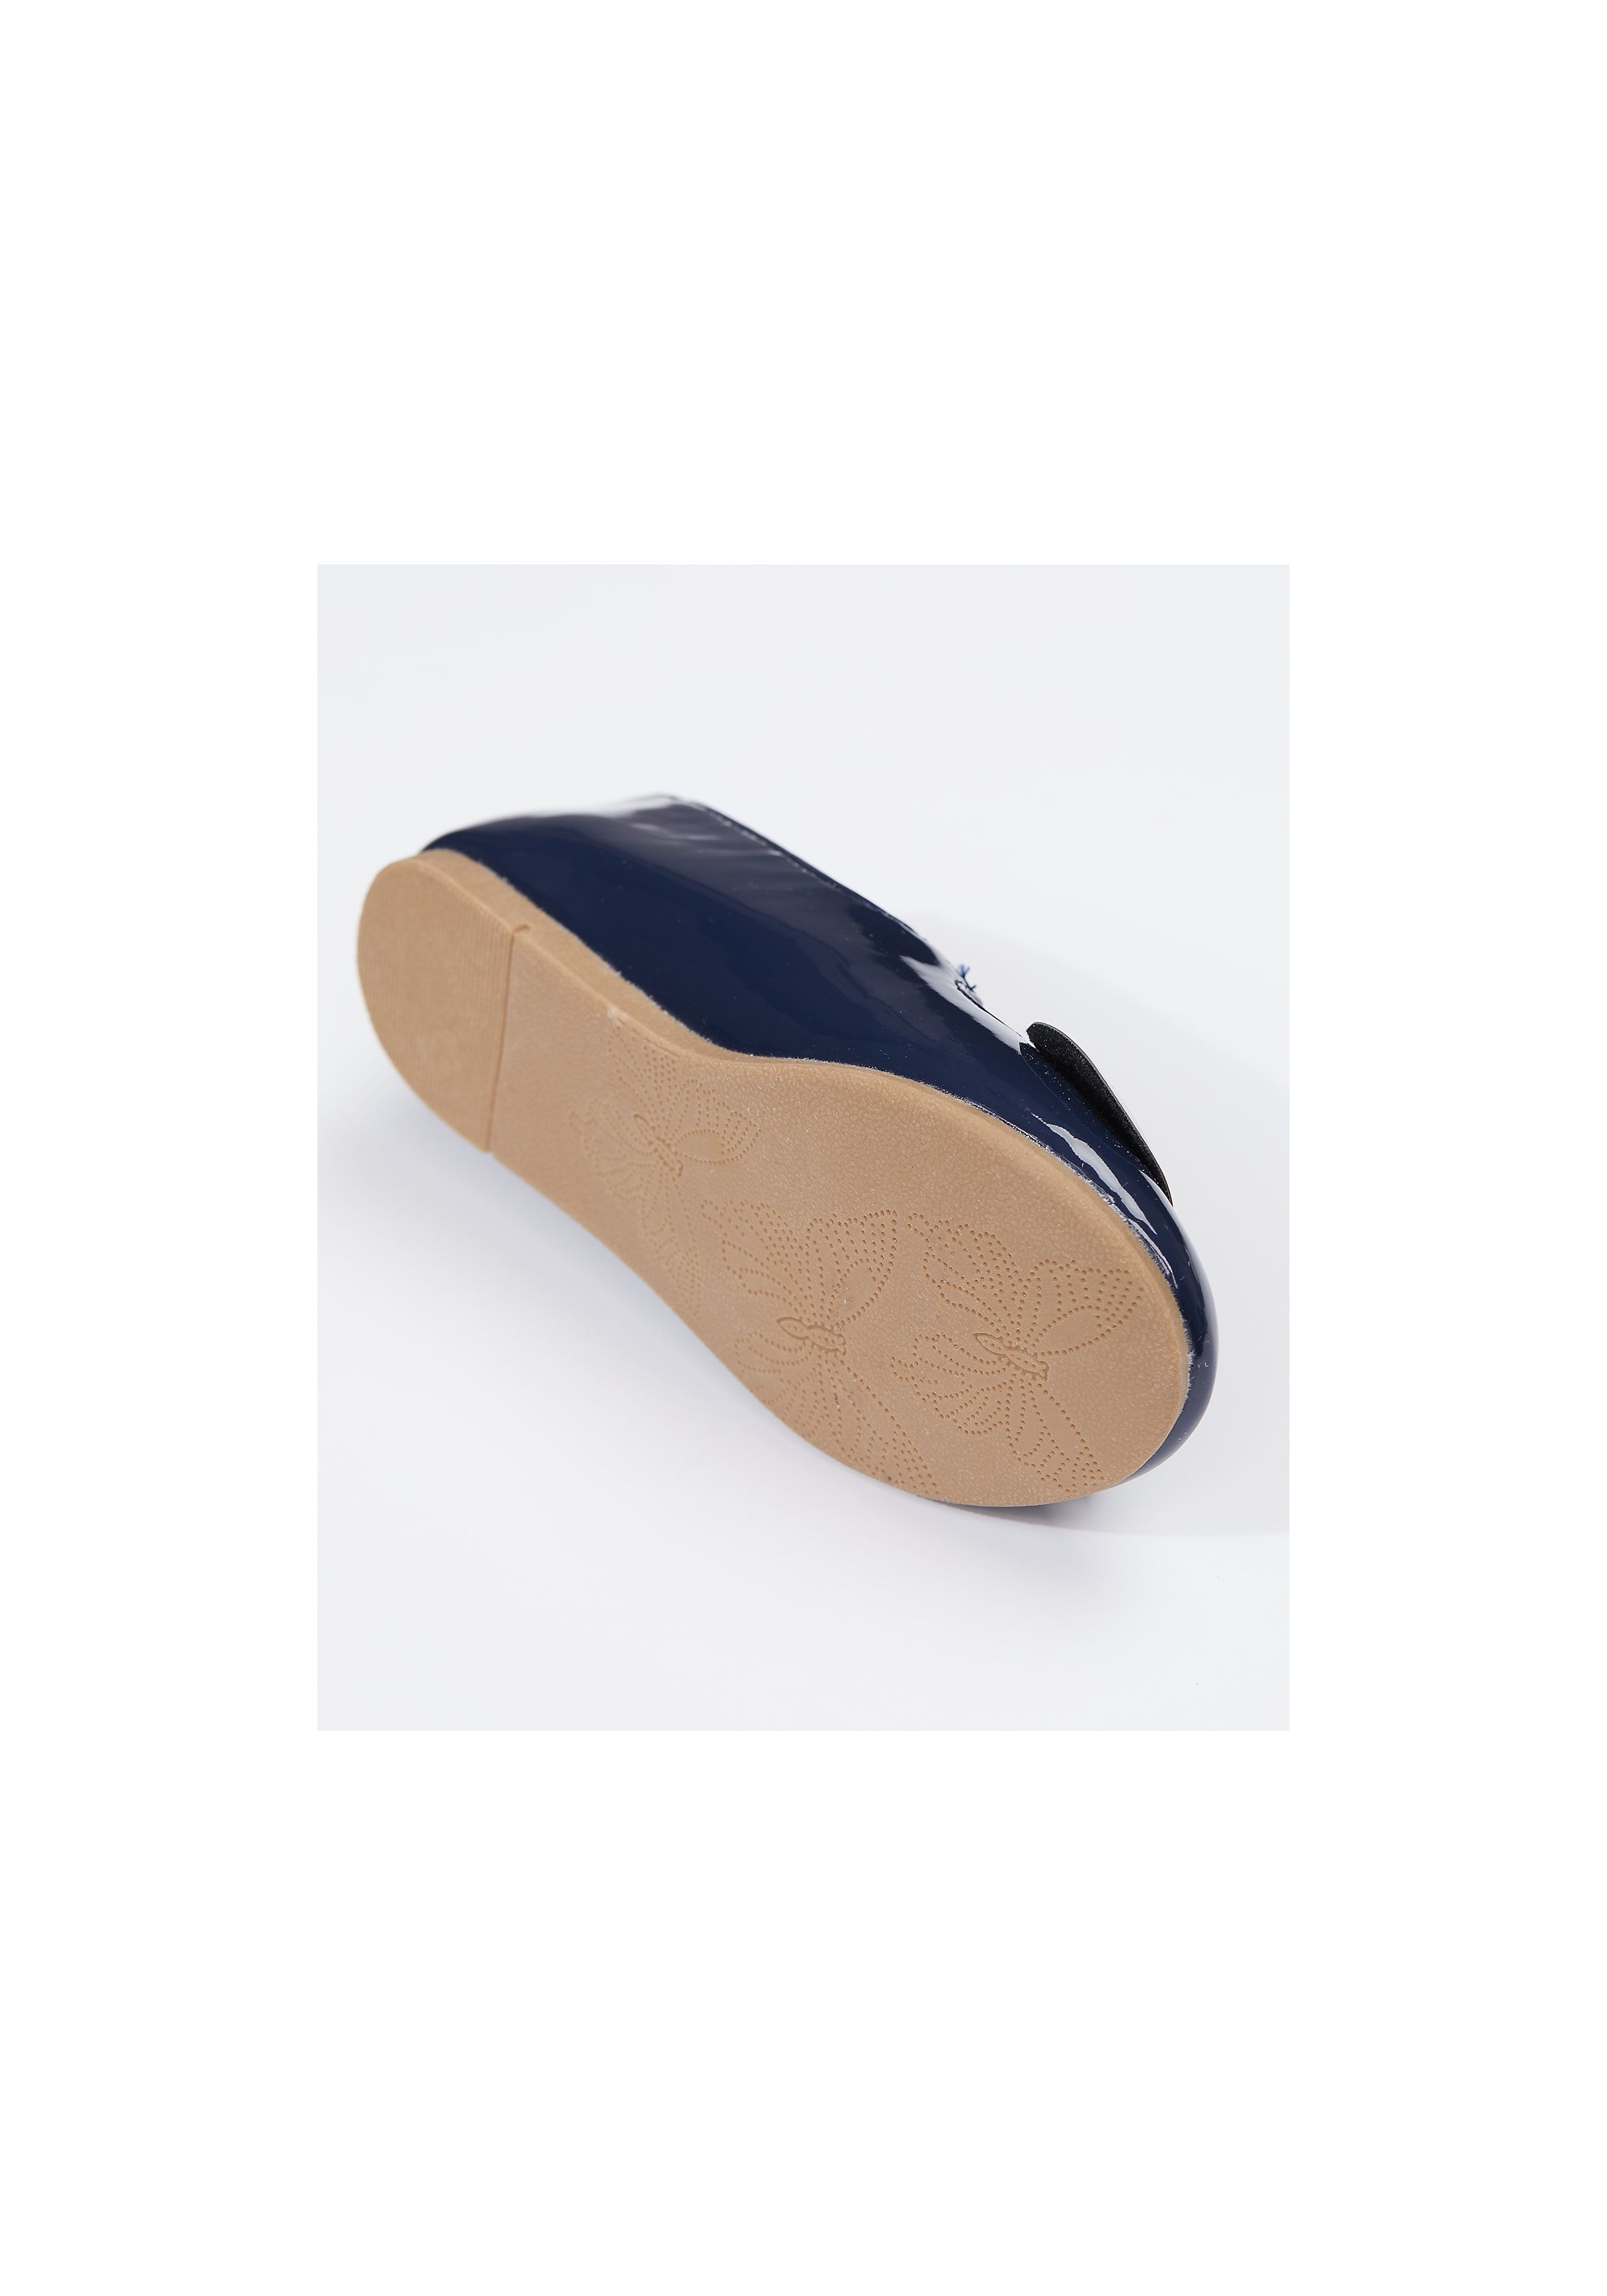 Mothercare | Girls Navy Patent Ballerina Shoes - Navy 3